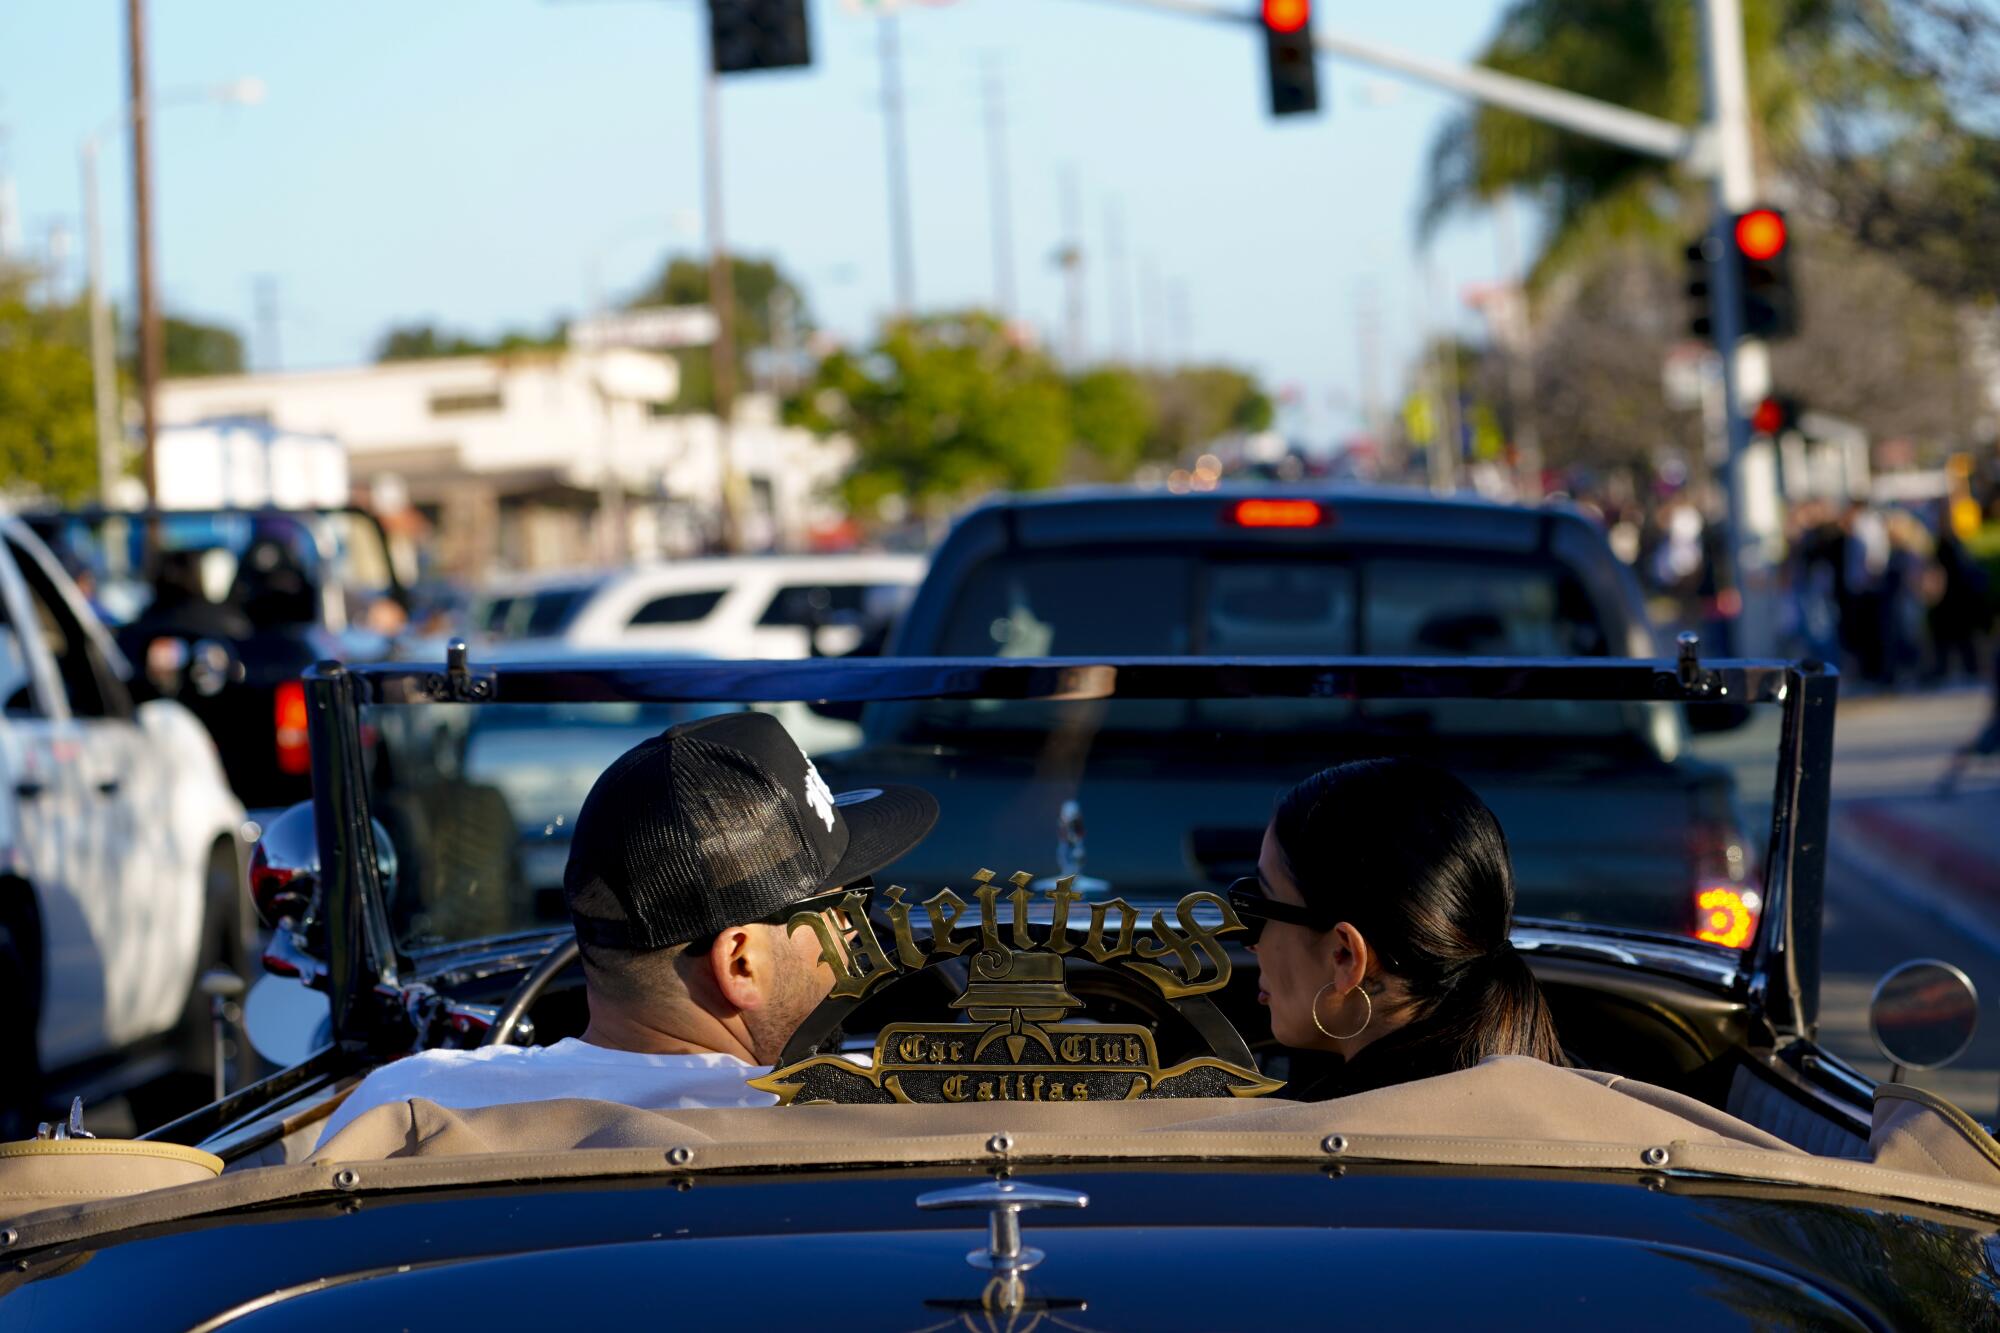 National City, CA - May 06: Customized lowriders cruise down Highland Avenue on Friday, May 6, 2022 in National City, CA. 